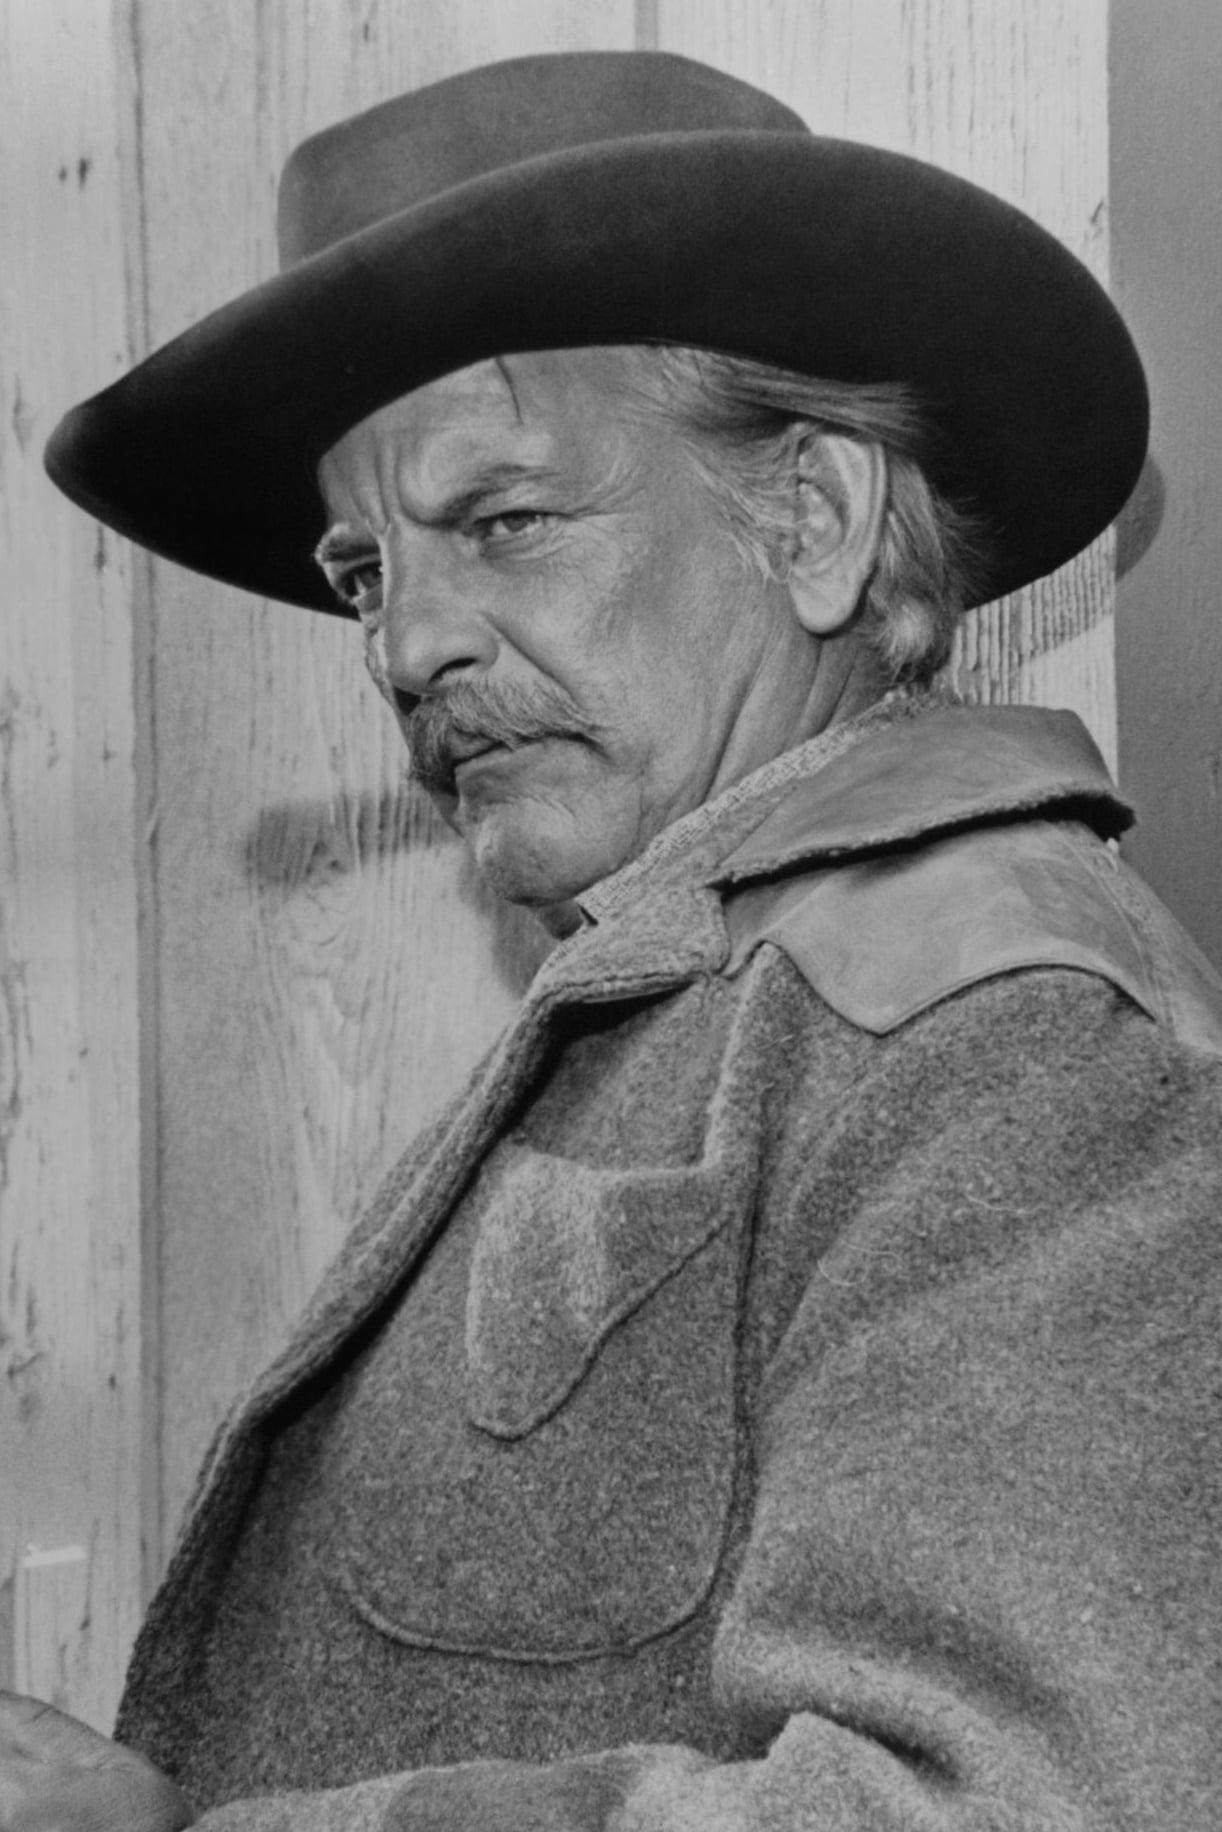 Denver Pyle | Bowie French